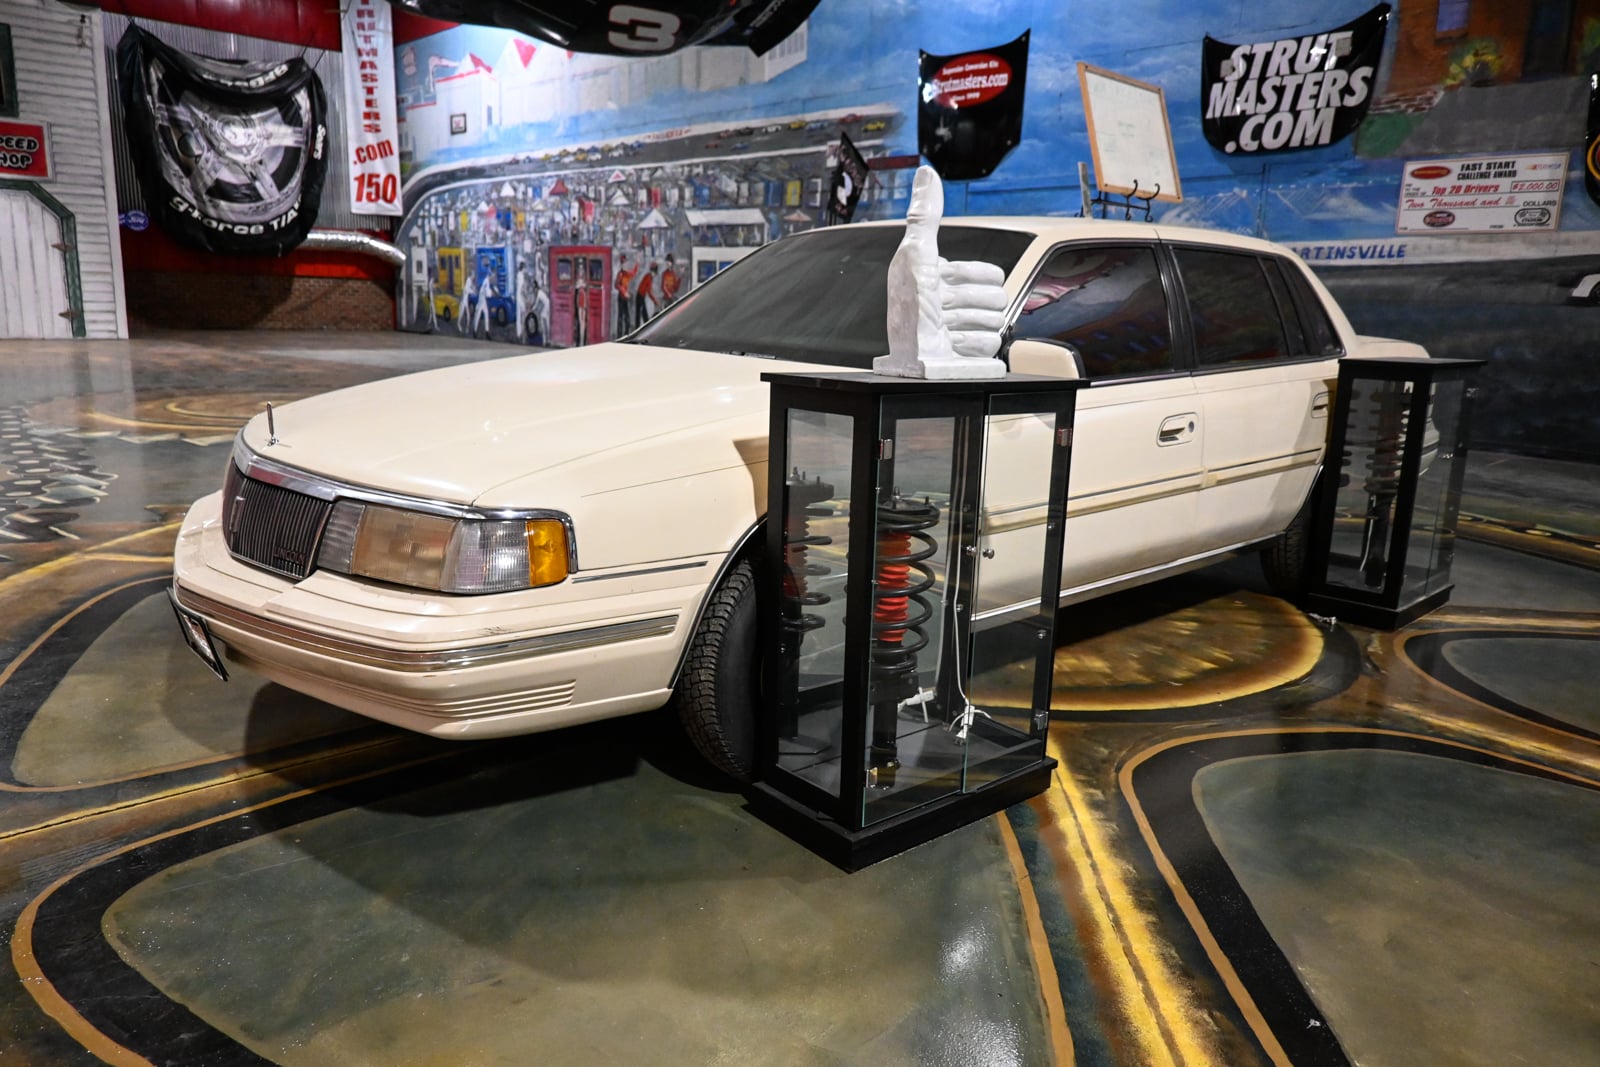 chip lofton's lincoln town car that gave the original idea for strutmasters